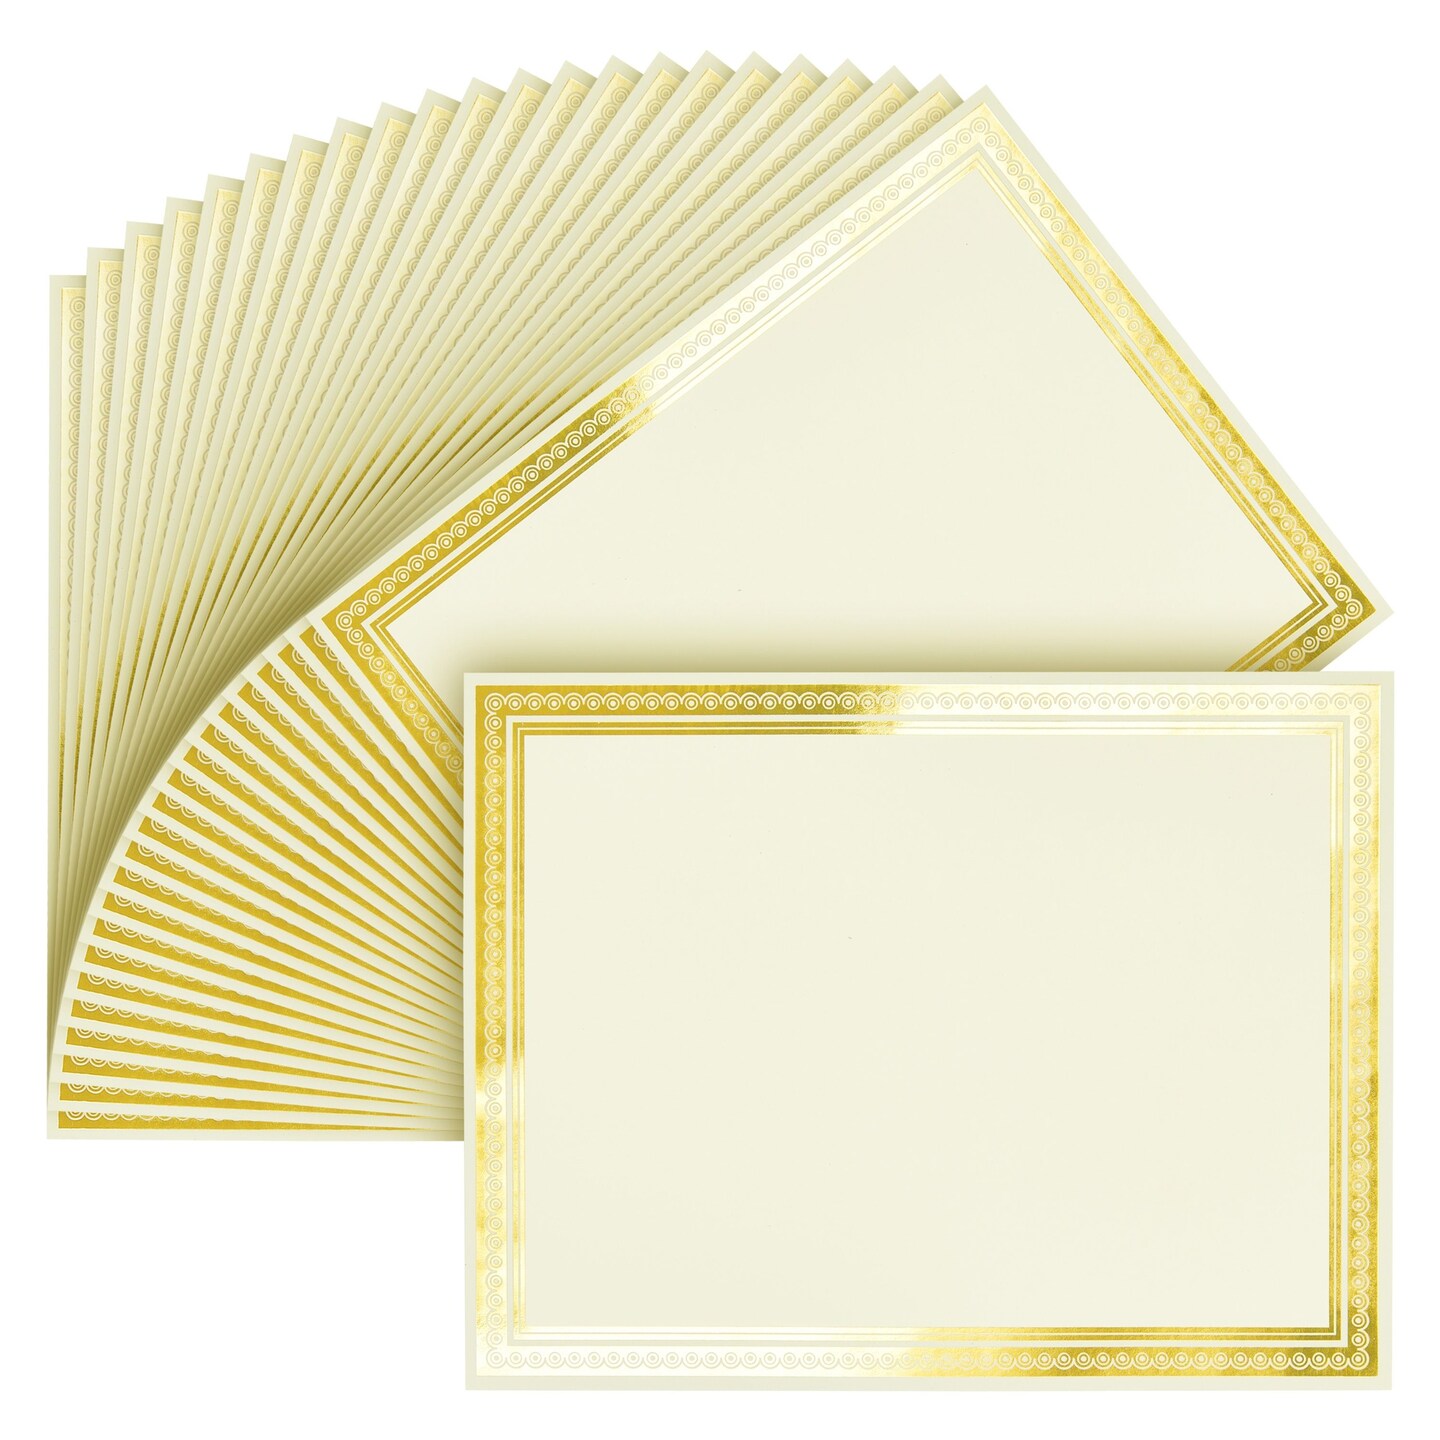 50 Sheets Gold Foil Certificate Paper for Printing - Customizable Blank  Cardstock with Border for Graduation Diploma, Achievement Awards,  Recognition Documents (8.5 x 11 in, White)